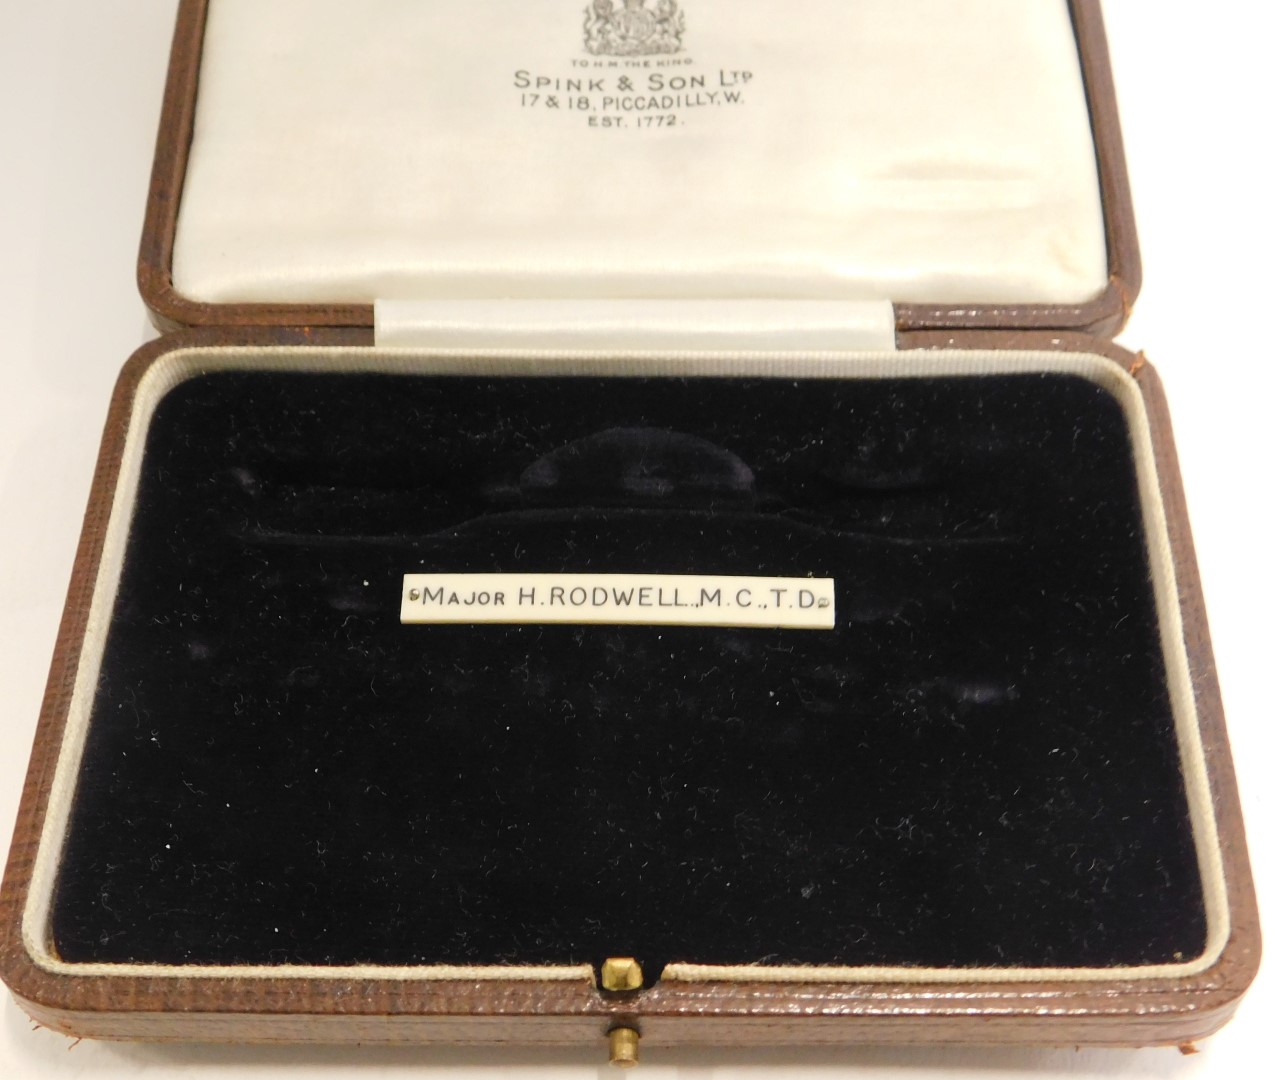 A cased set of World War II medal miniatures, relating to Major H Rodwell MCTD, comprising the Victo - Image 3 of 3